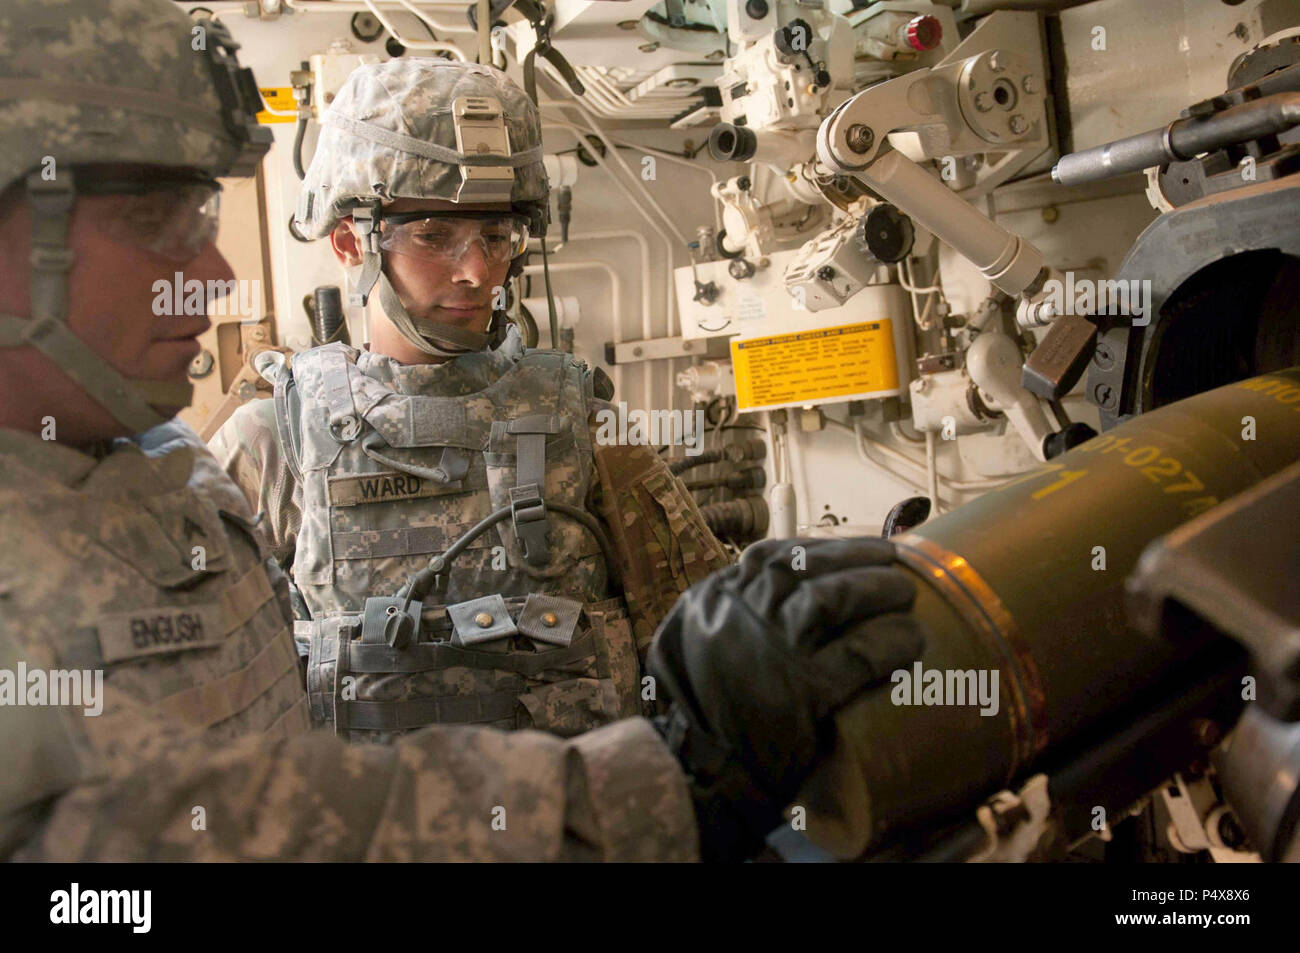 Pvt. Edward N. Ward, a La Habra, California native, assigned to Battery B., 4th Battalion, 27th Field Artillery Regiment, 2nd Brigade Combat Team, 1st Armored Division observes Cpl. Collin English, a Keys, Florida native, assigned to Battery B., 4-27 FA, 2nd BCT, 1st AD load an artillery round into the breach of a M109A6 Paladin cannon artillery system during Iron Focus May10 at the training site here. Iron Focus 17 training enables the commander to focus leadership, training, and resources on improving 2-1 AD’s combat readiness and worldwide operations during their transition from a Training  Stock Photo